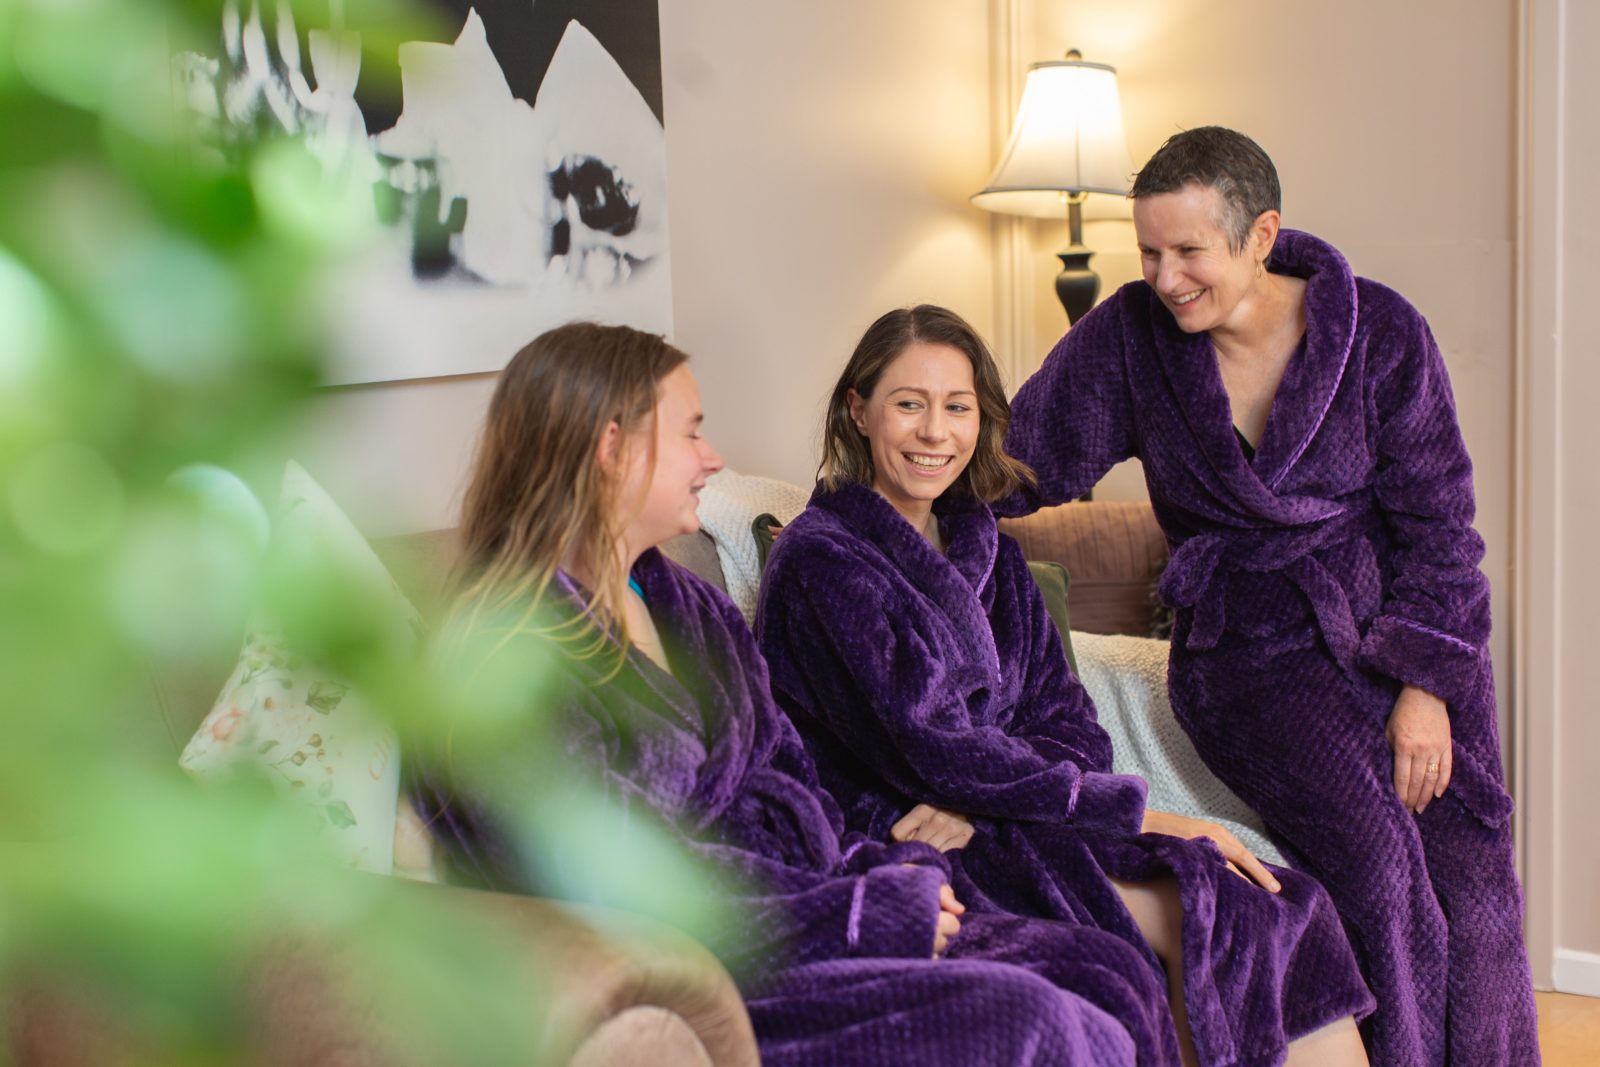 Day Spa group booking - Hens Party